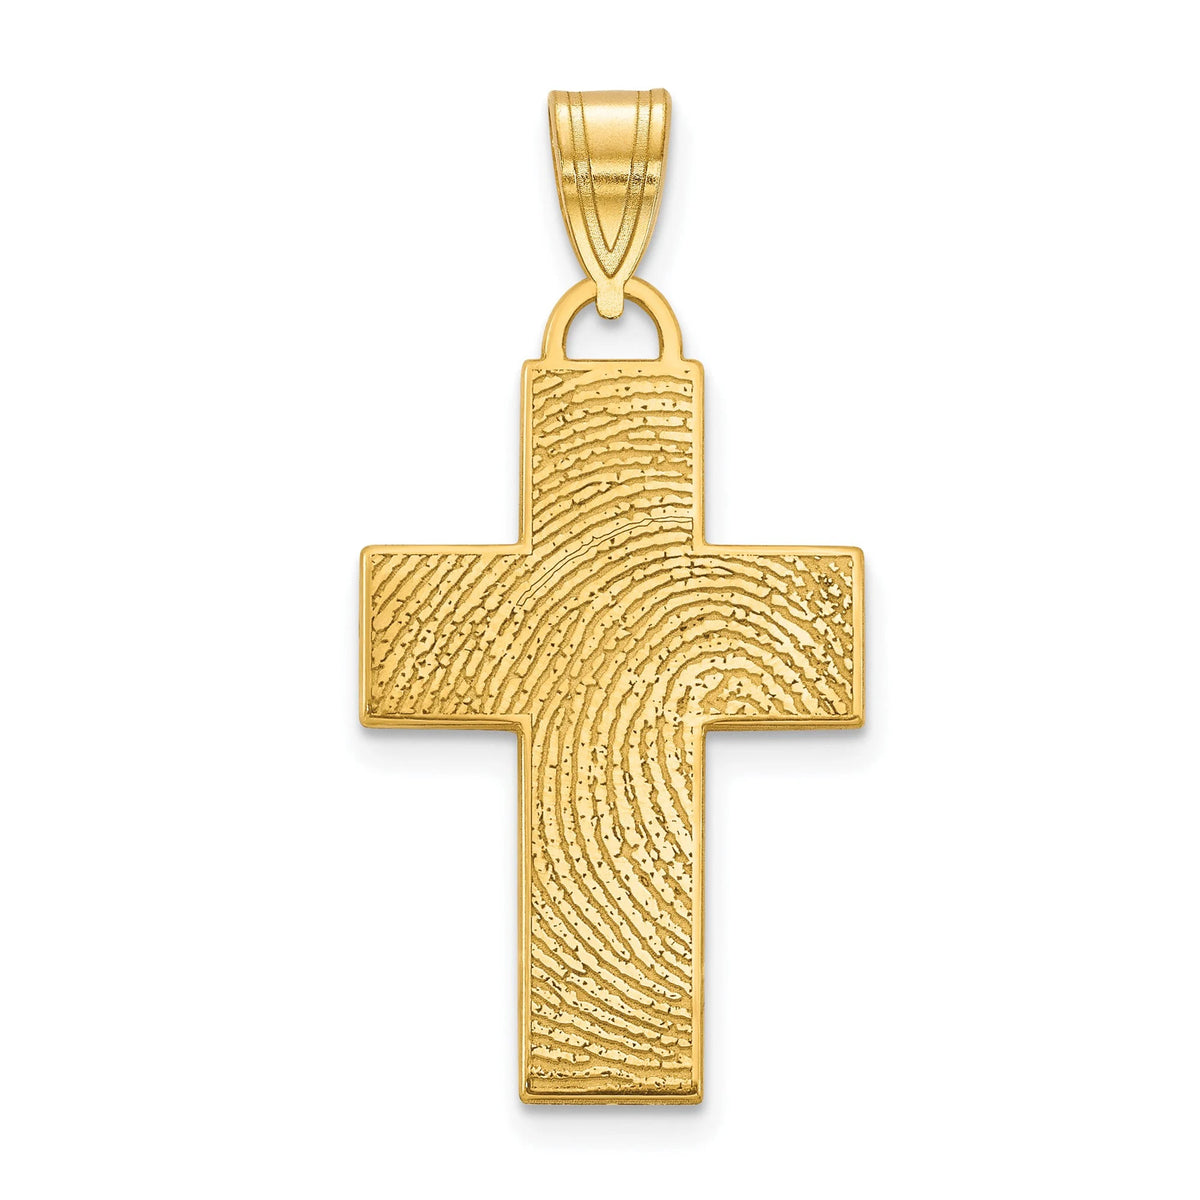 Fingerprint Cross  with Necklace in Sterling Silver or Gold Plated Sterling Silver - Gift Box Included - Made in USA (Cross 1 inch Long)